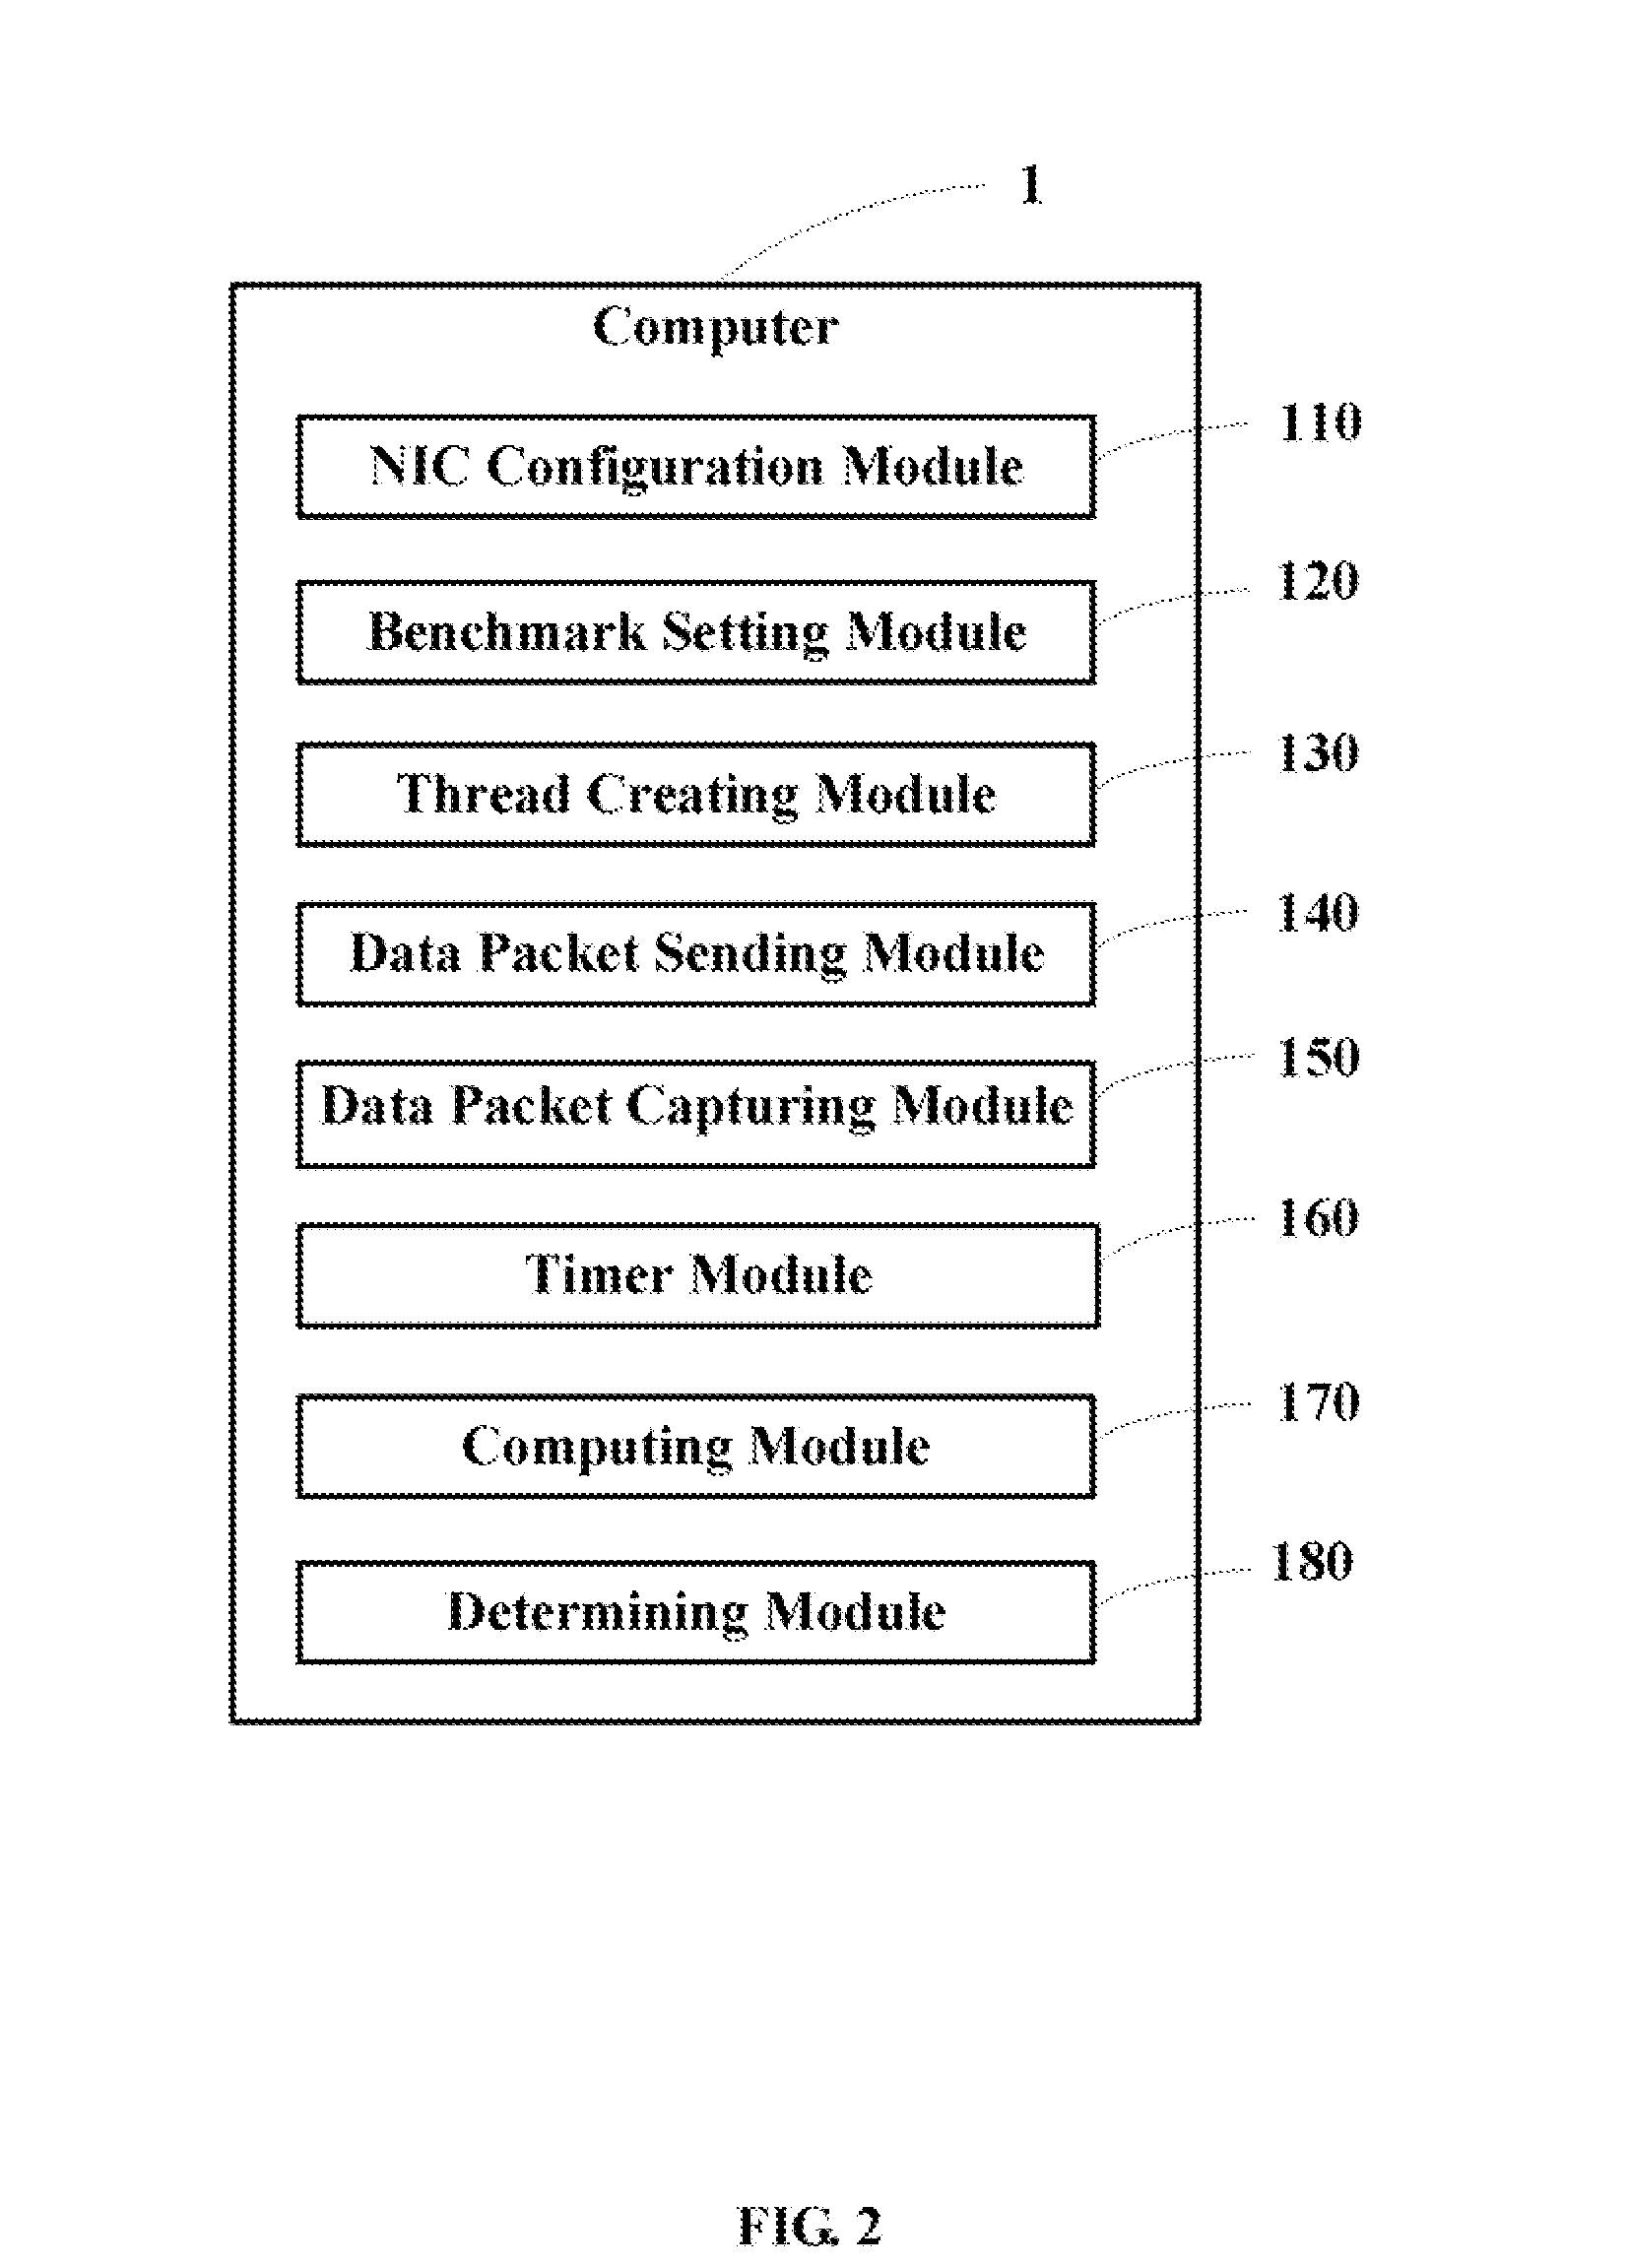 System and method for testing transmission speeds of network interface cards in a computer